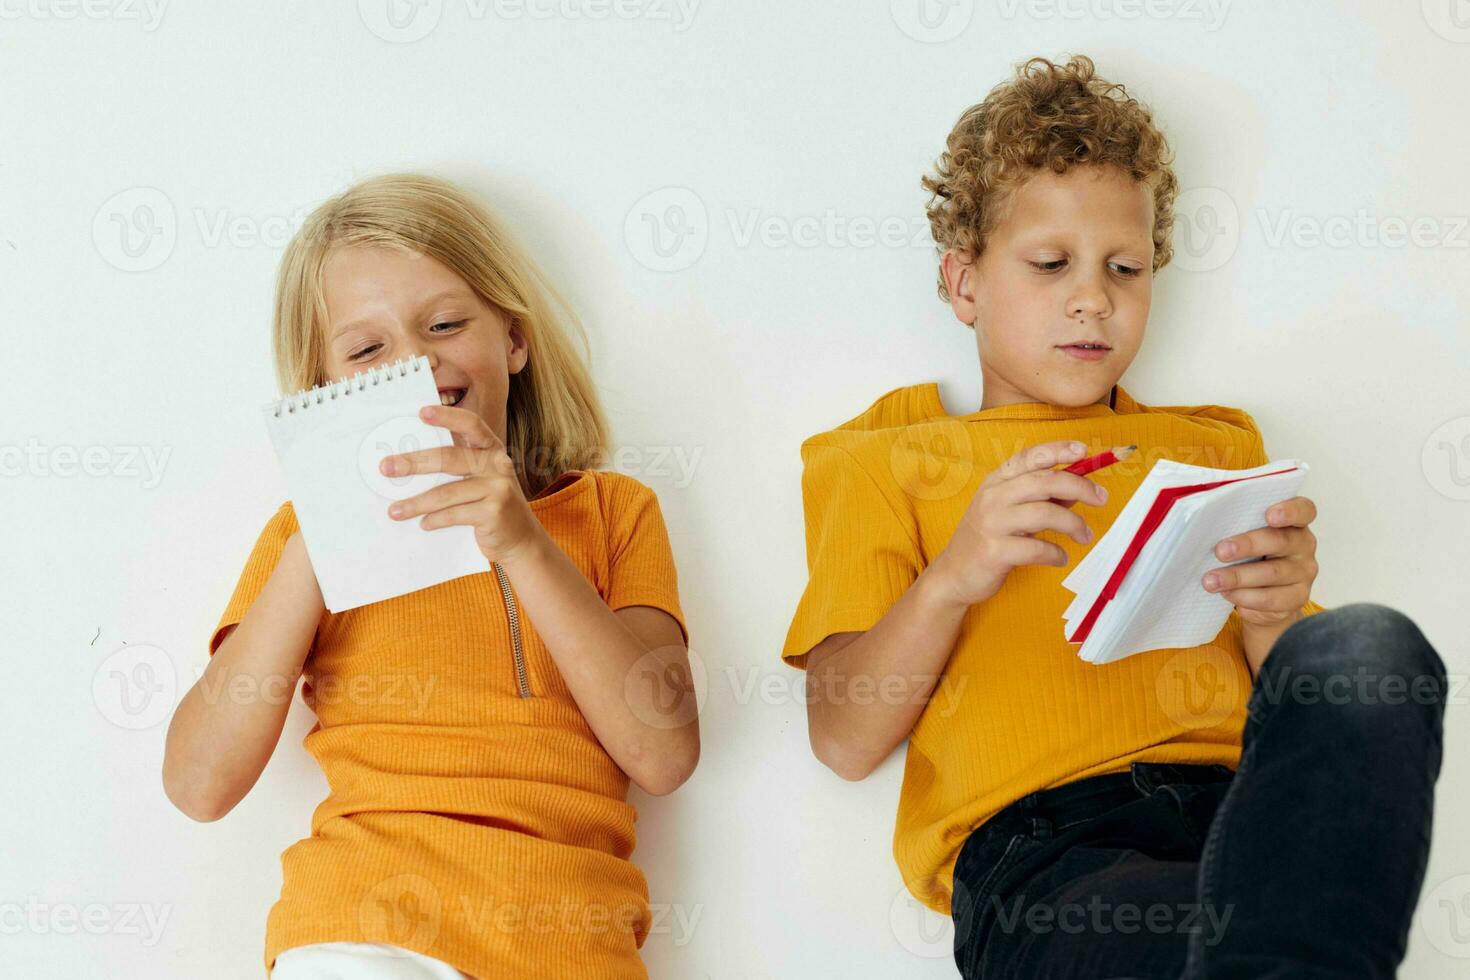 two joyful children drawing in notebooks lying on the floor light background unaltered photo